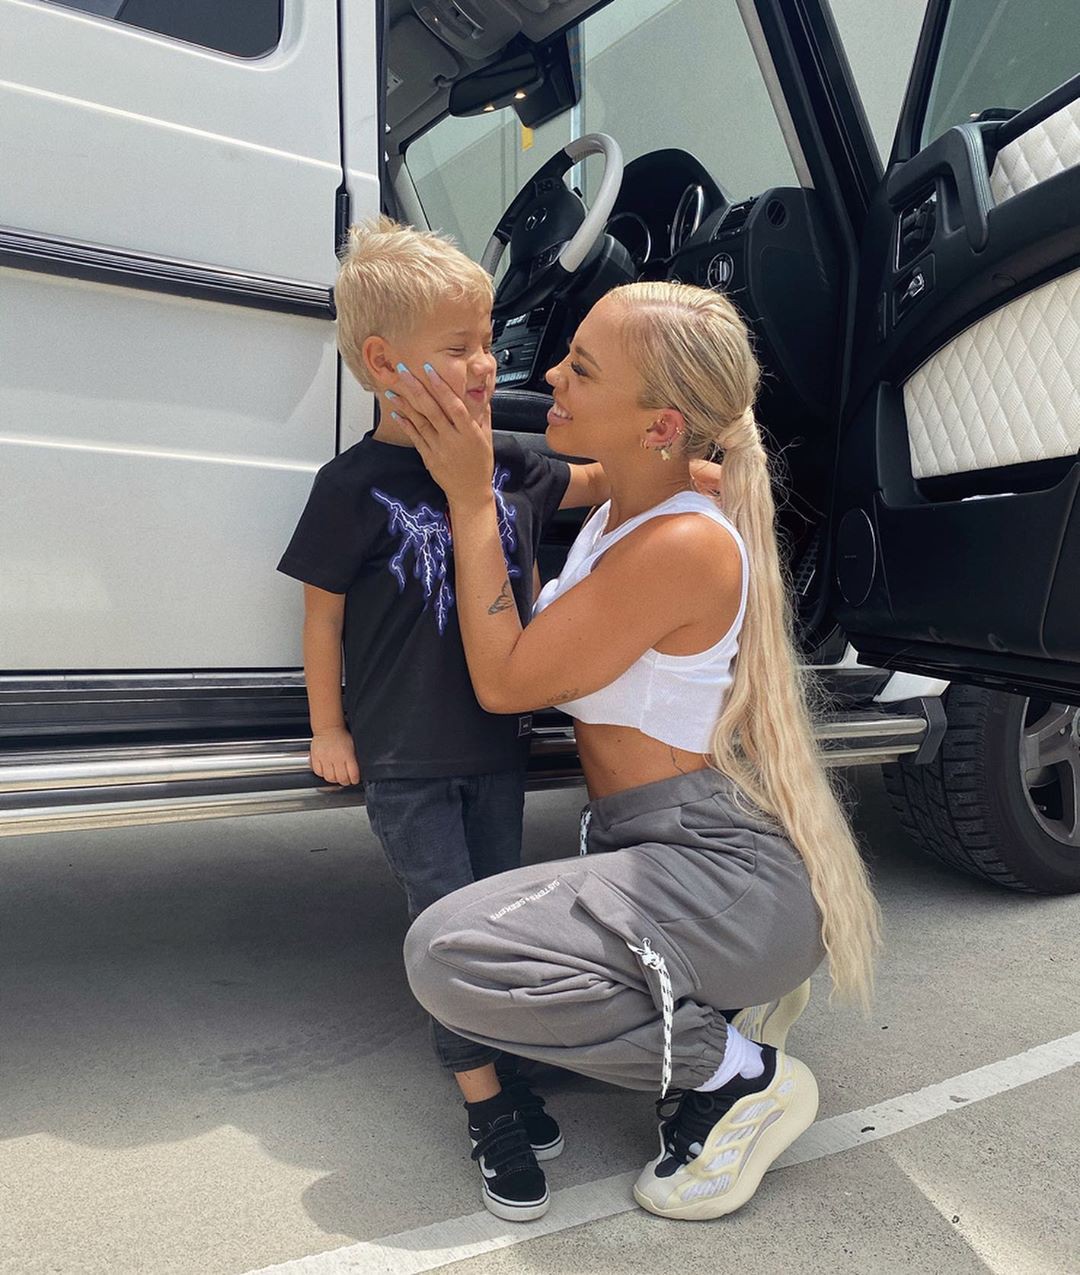 Stunning Insta Wallpaper of Actress Tammy Hembrow: Hot Instagram Models,  Hot Fitness Babes,  Sexy Tammy Hembrow,  Tammy Hembrow,  Hot Insta Girls,  Hottest Tammy Hembrow  